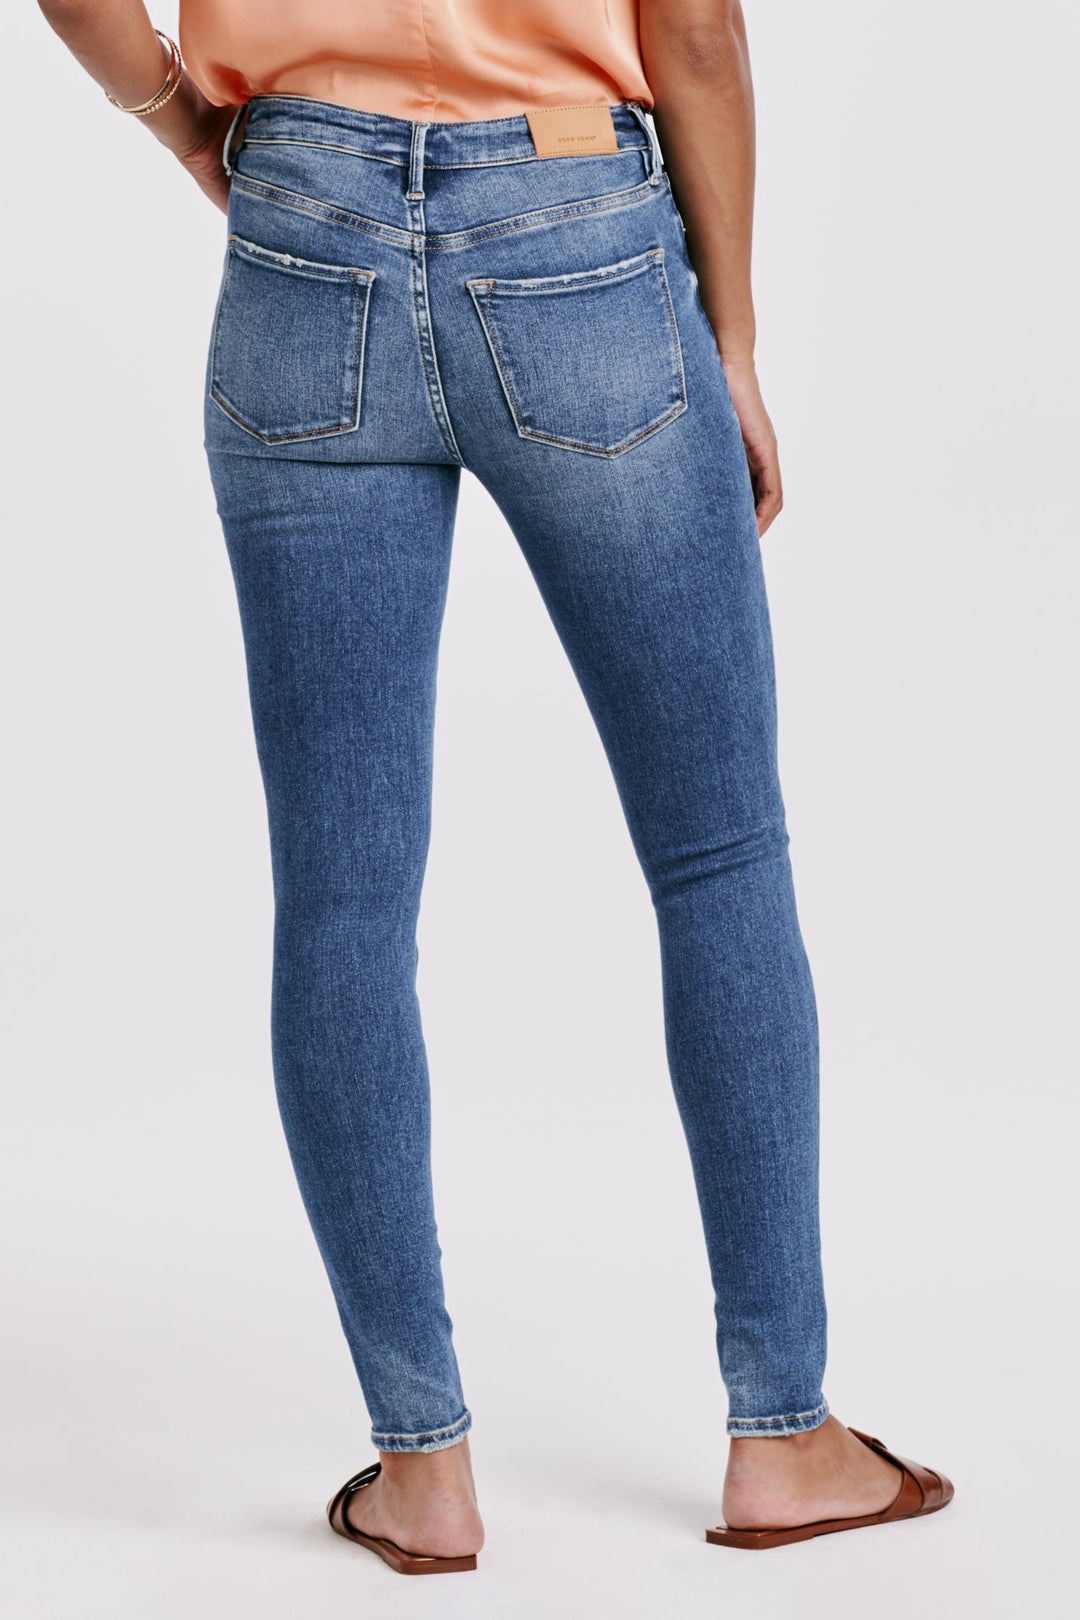 GISELE HIGH RISE ANKLE JEANS-MANATIBA - Kingfisher Road - Online Boutique